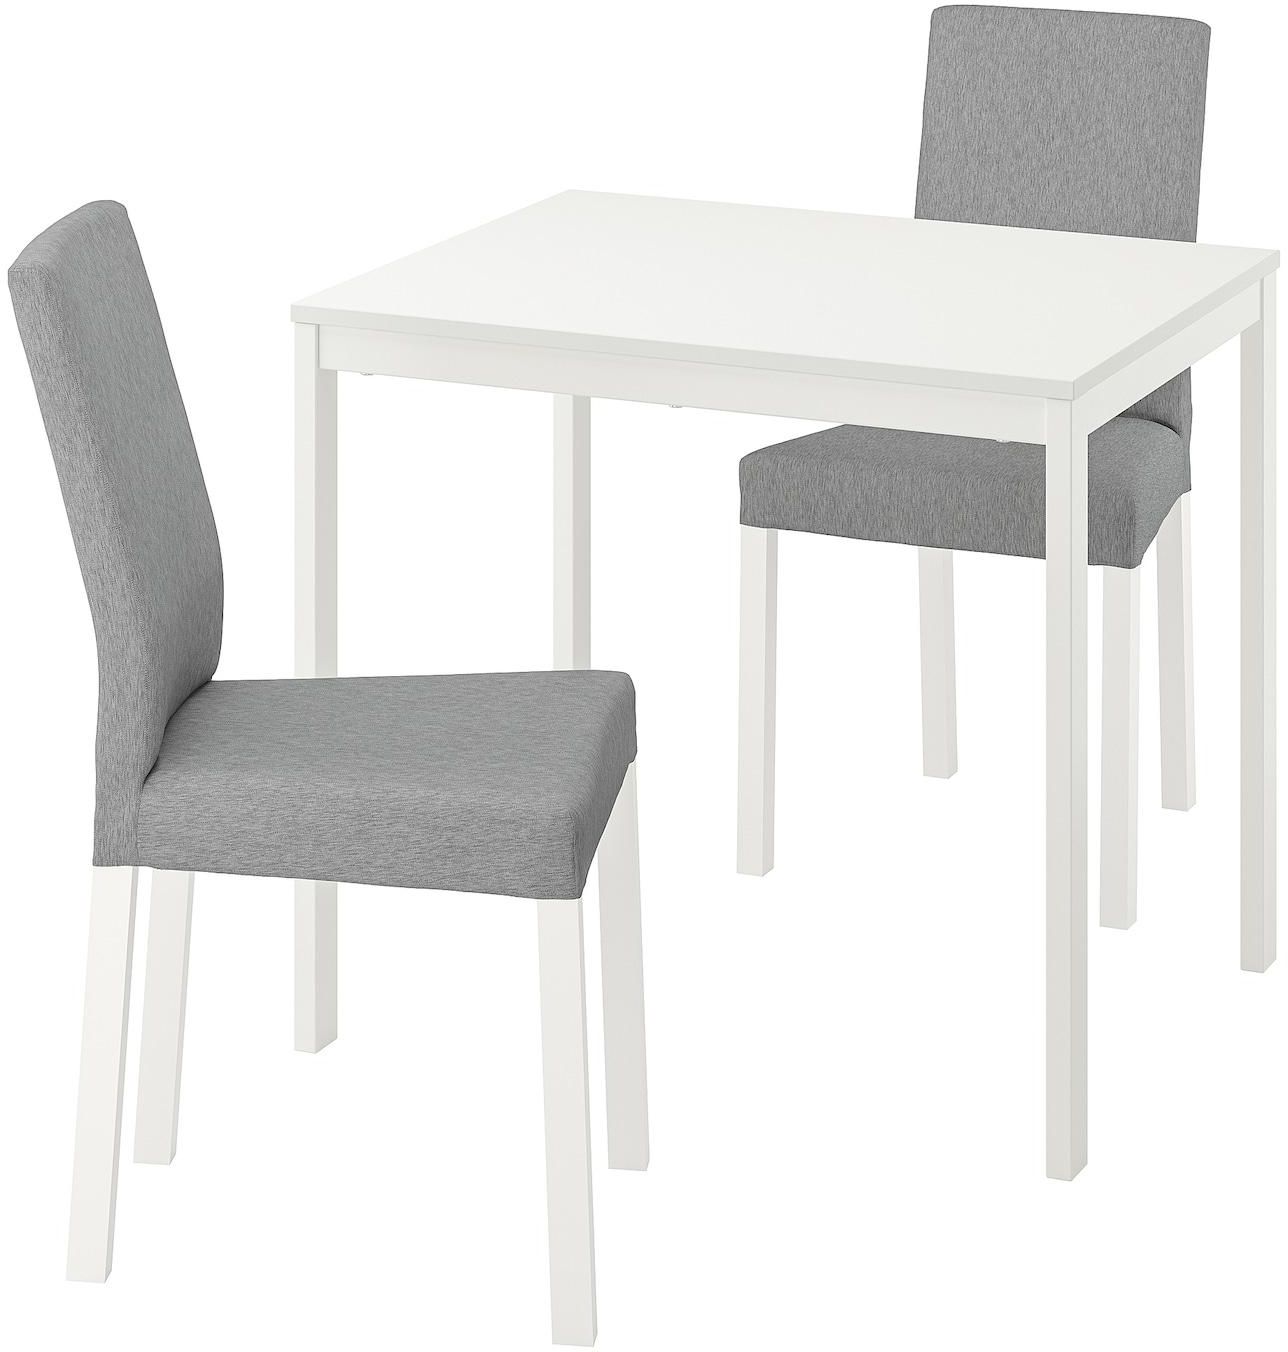 VANGSTA / KÄTTIL Table and 2 chairs - white/Knisa light grey 80/120 cm